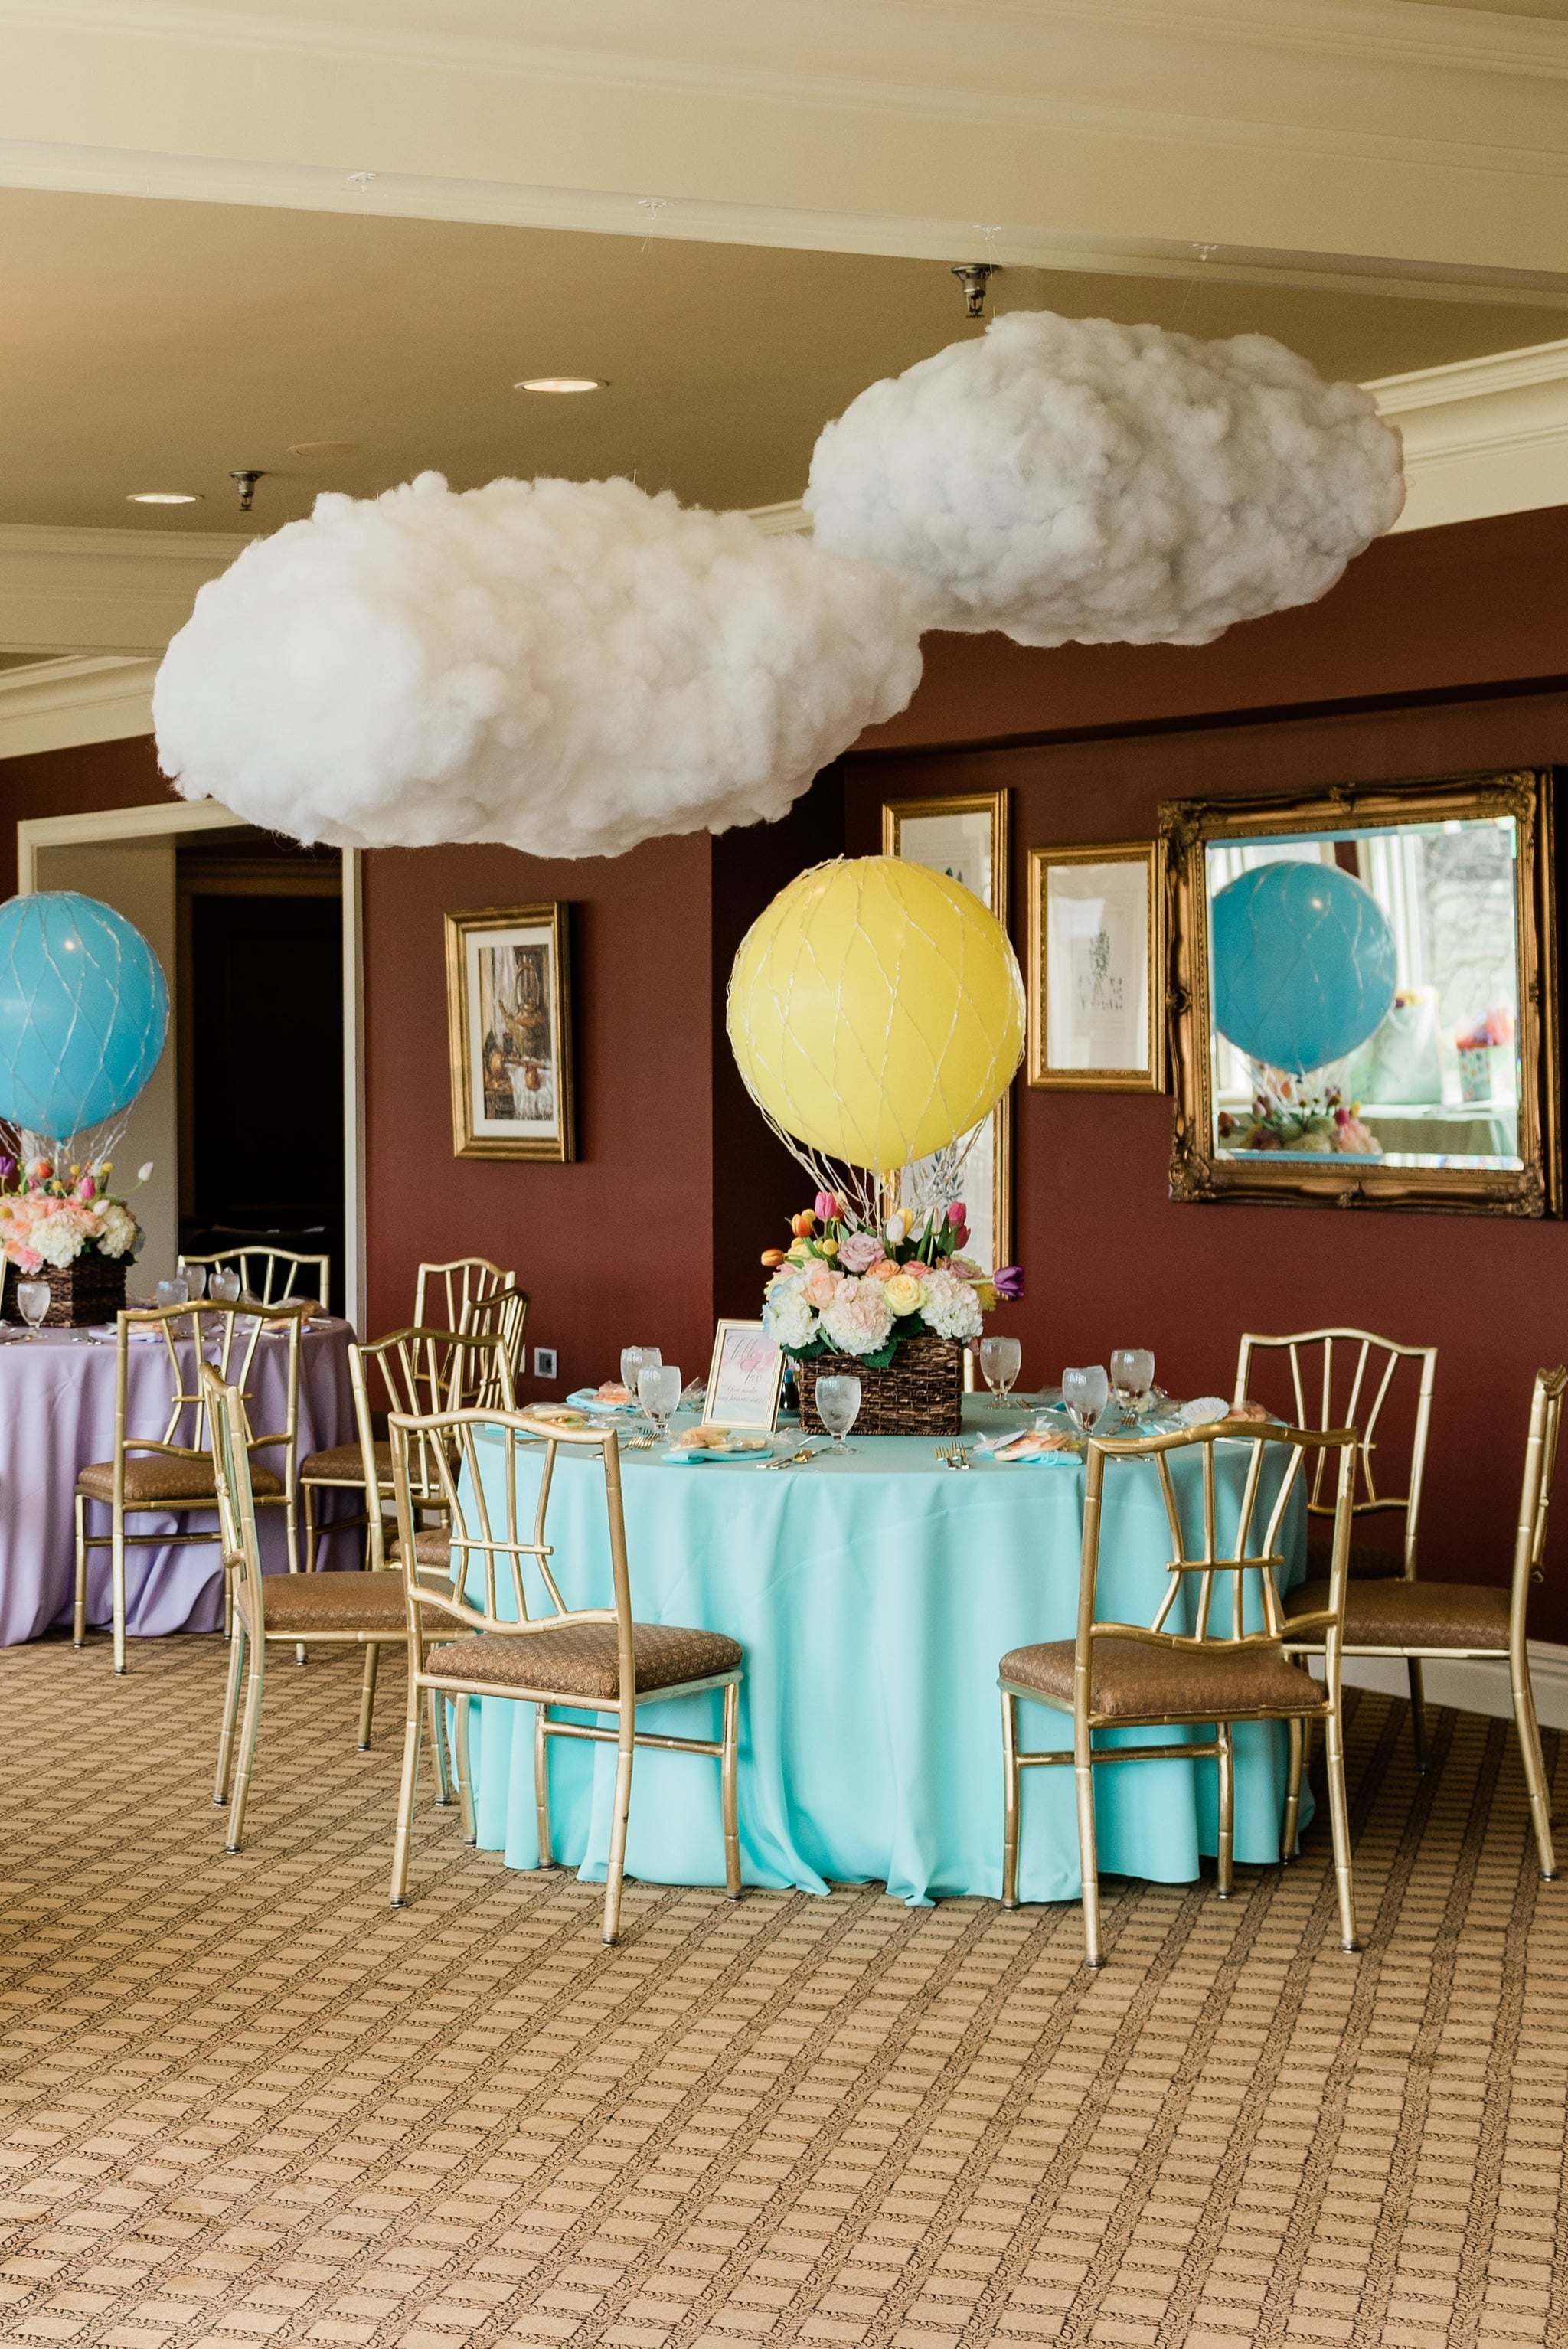 up themed baby shower